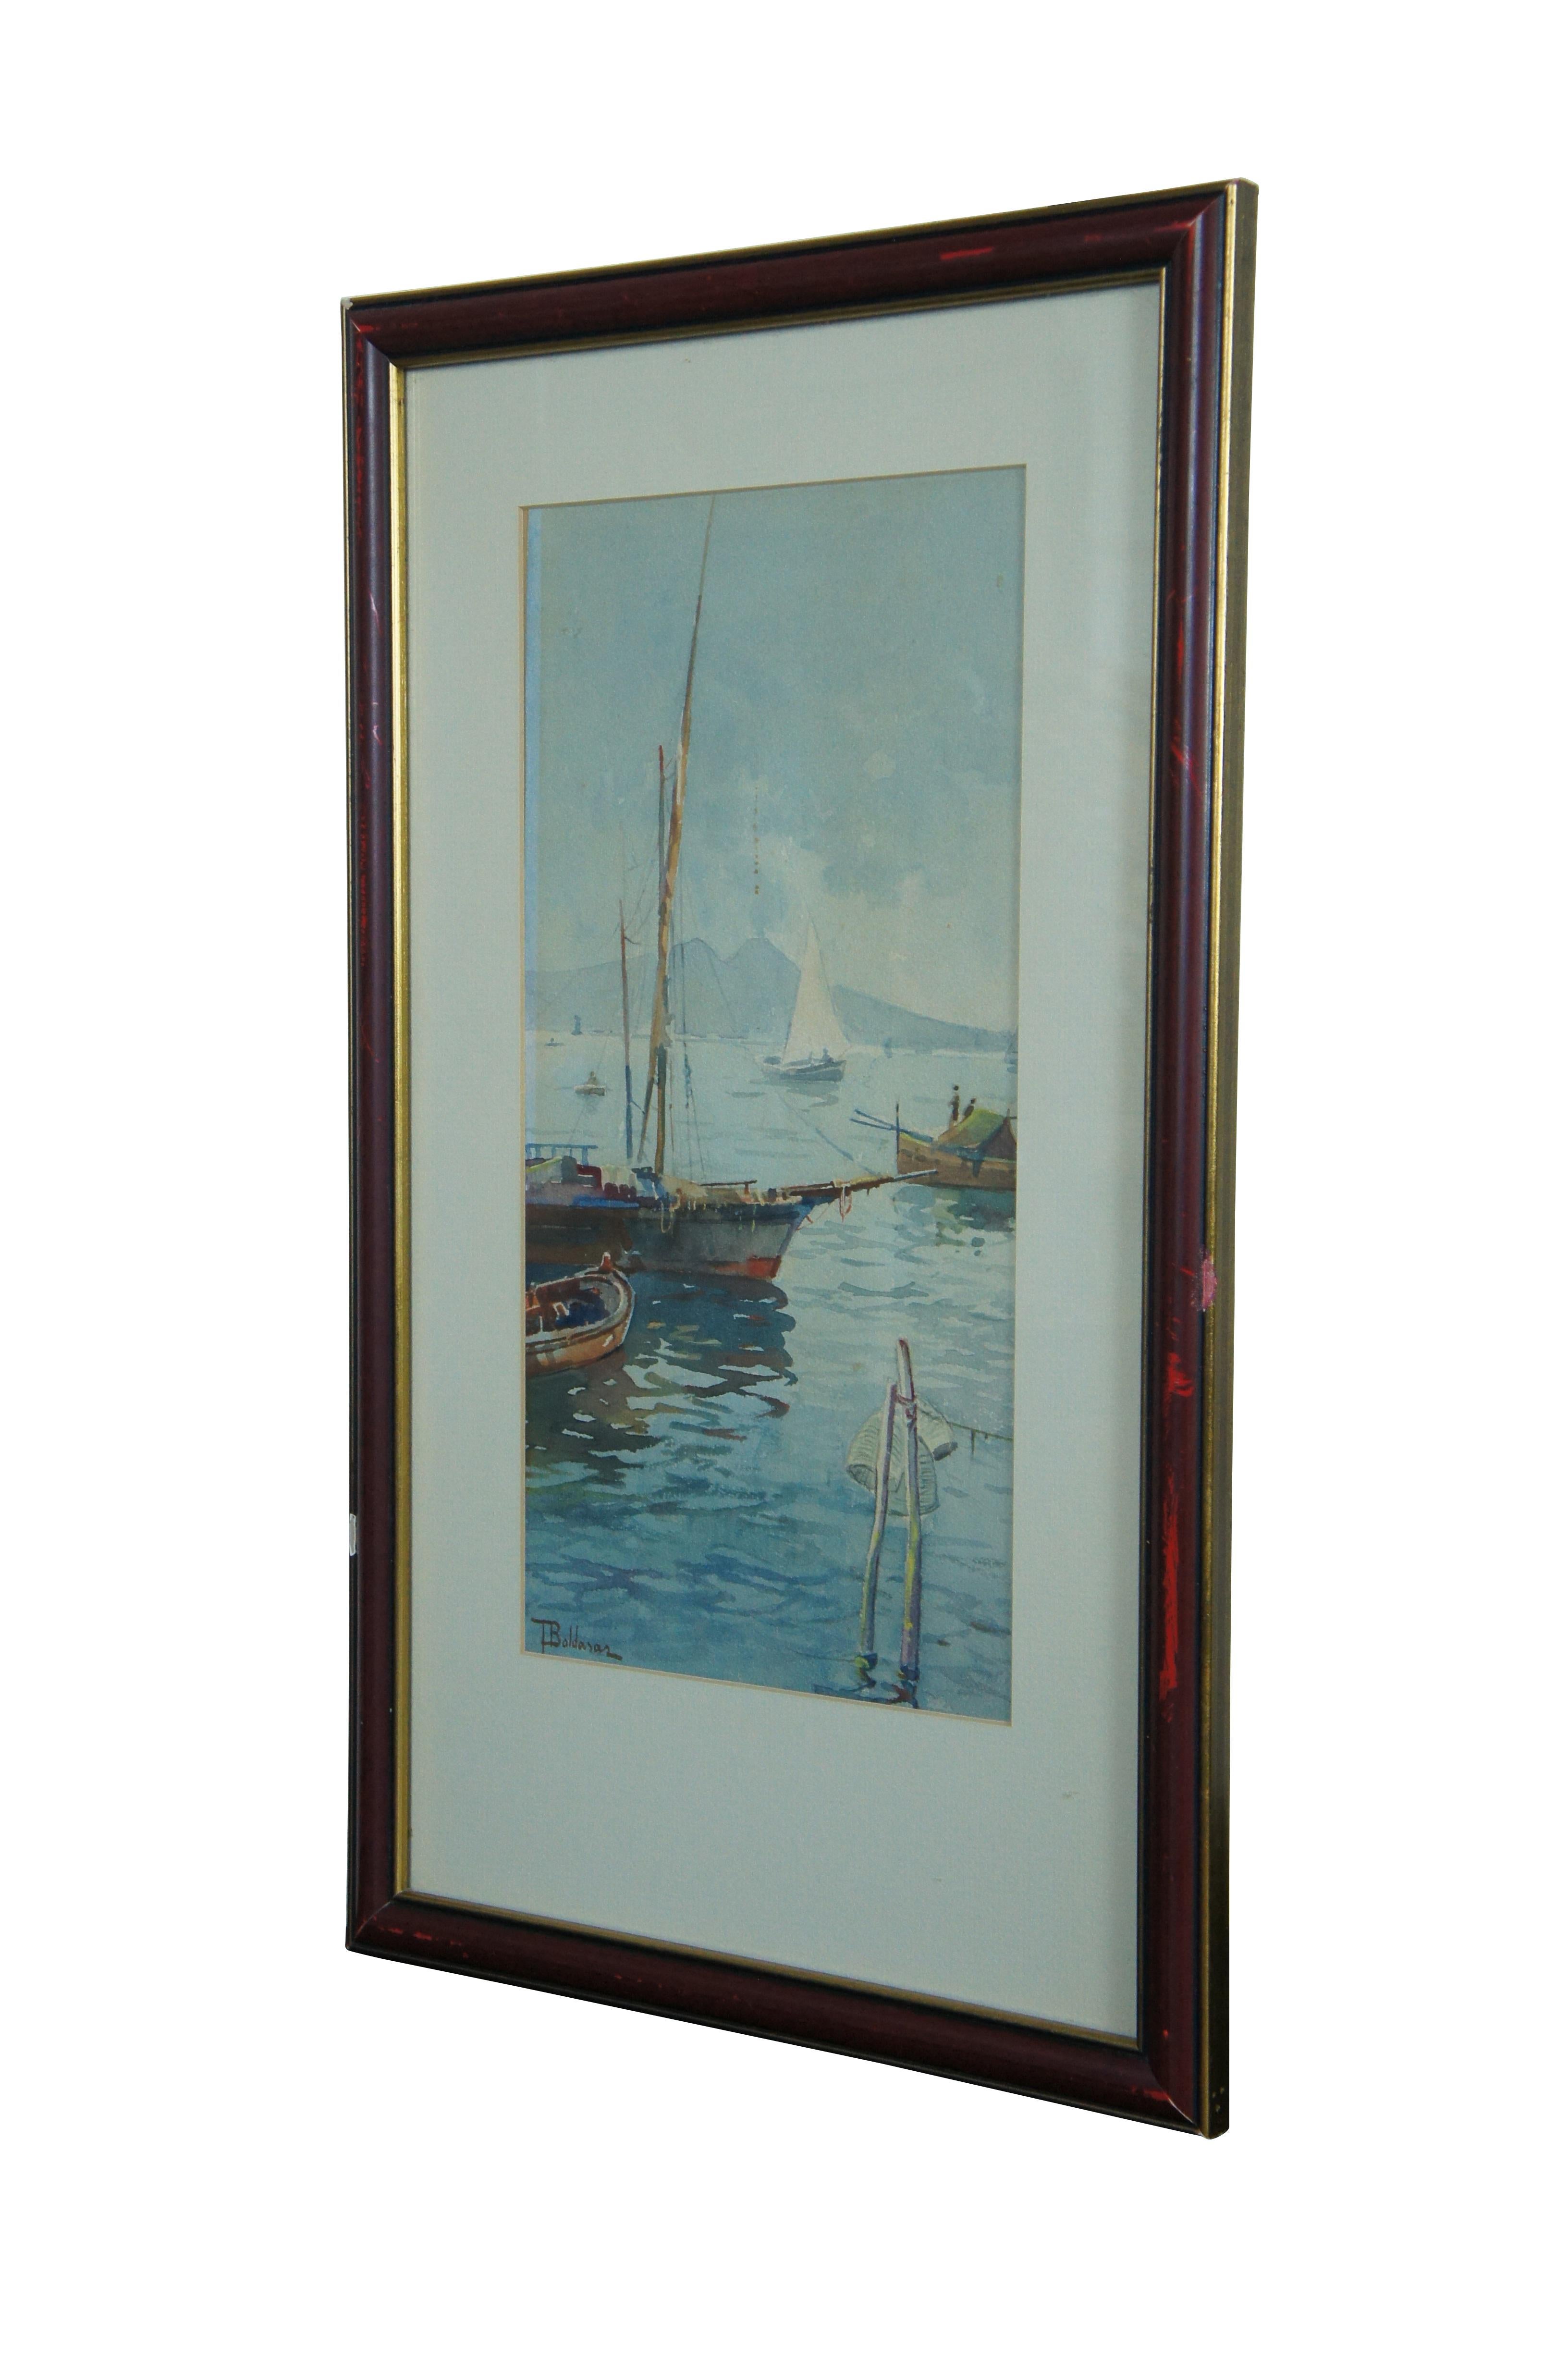 Early 20th century original watercolor painting by T. Baldasar, showing an array of sailboats in a harbor with mountains in the background. Signed lower left corner. Red painted frame with raised bevel and gilt edges; white mat.

Dimensions:
12.75